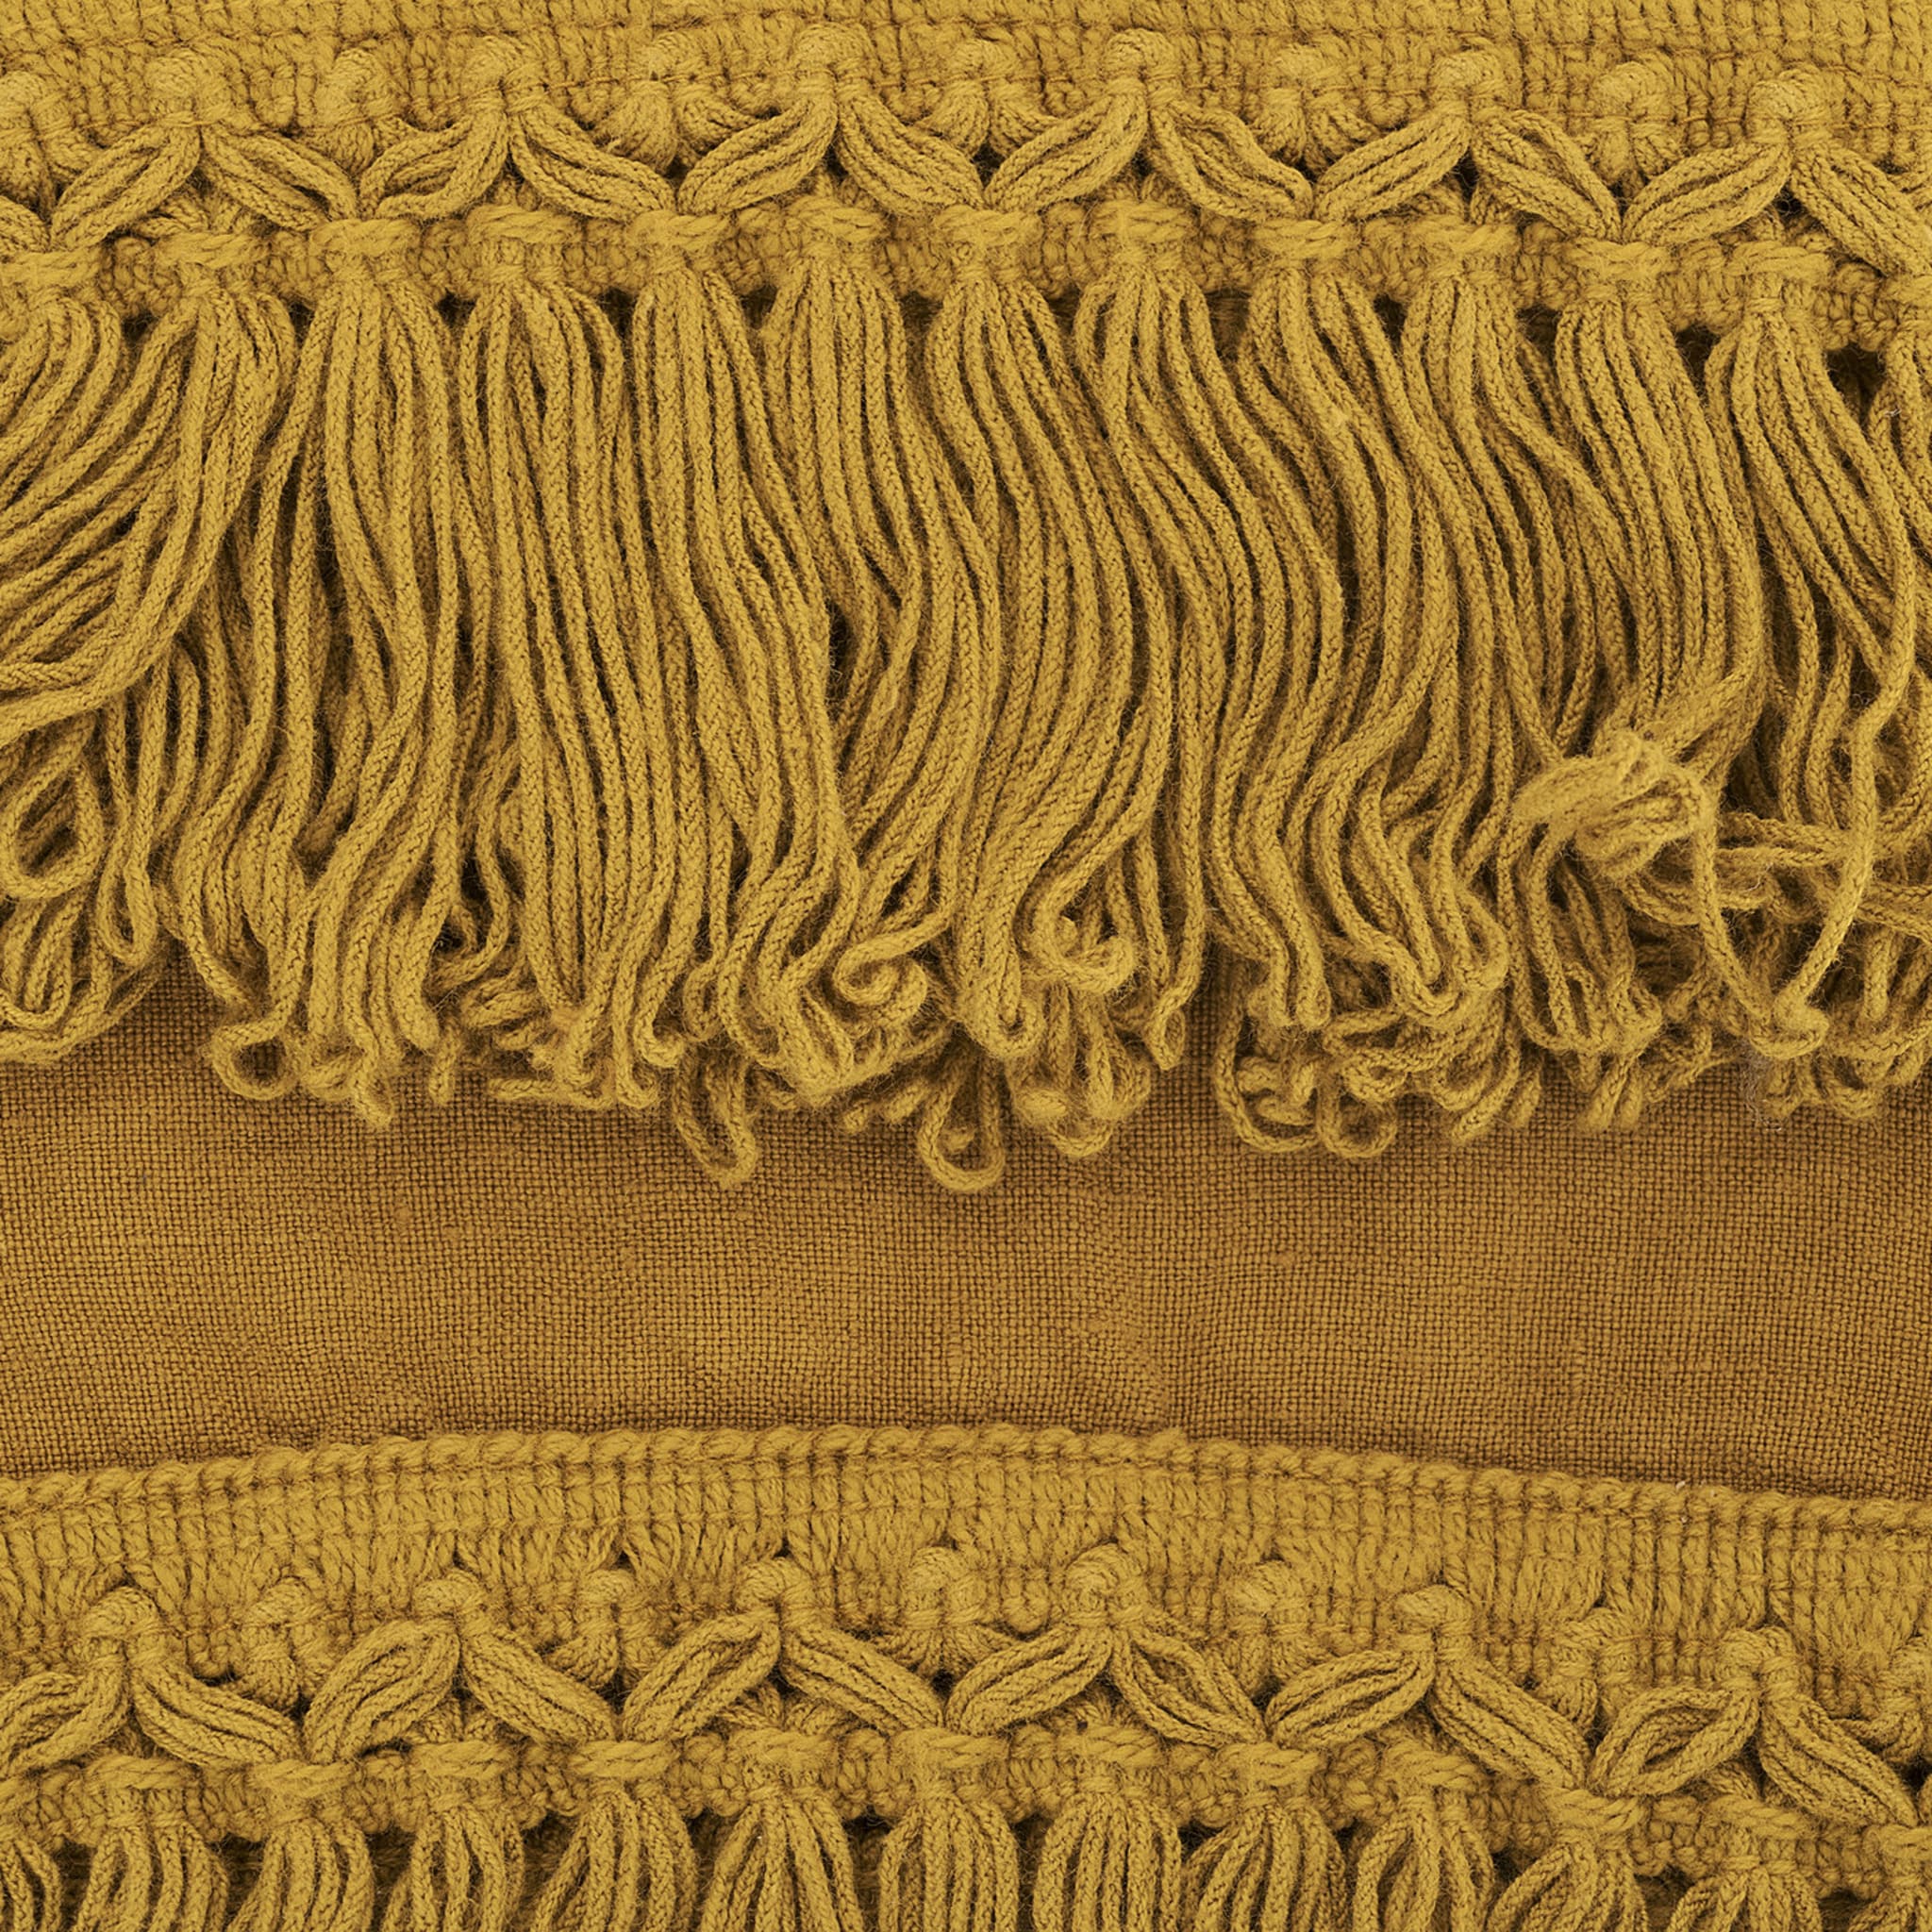 Set of 2 Mustard Linen Towels with Long Fringes - Alternative view 1